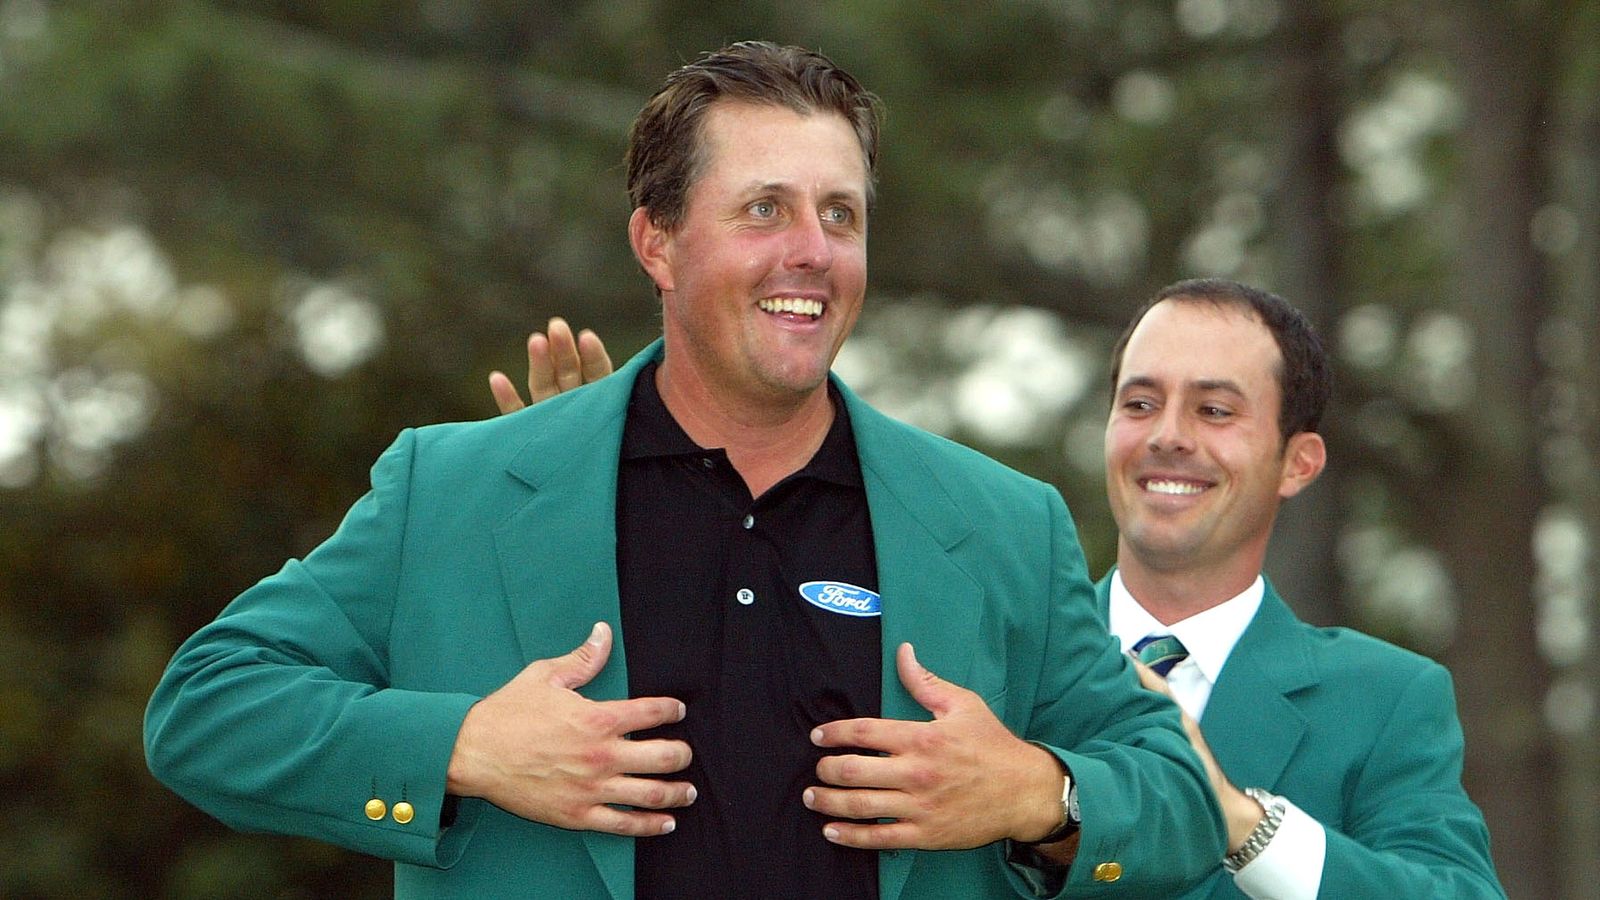 The Masters Phil Mickelson relishing Augusta National return Golf